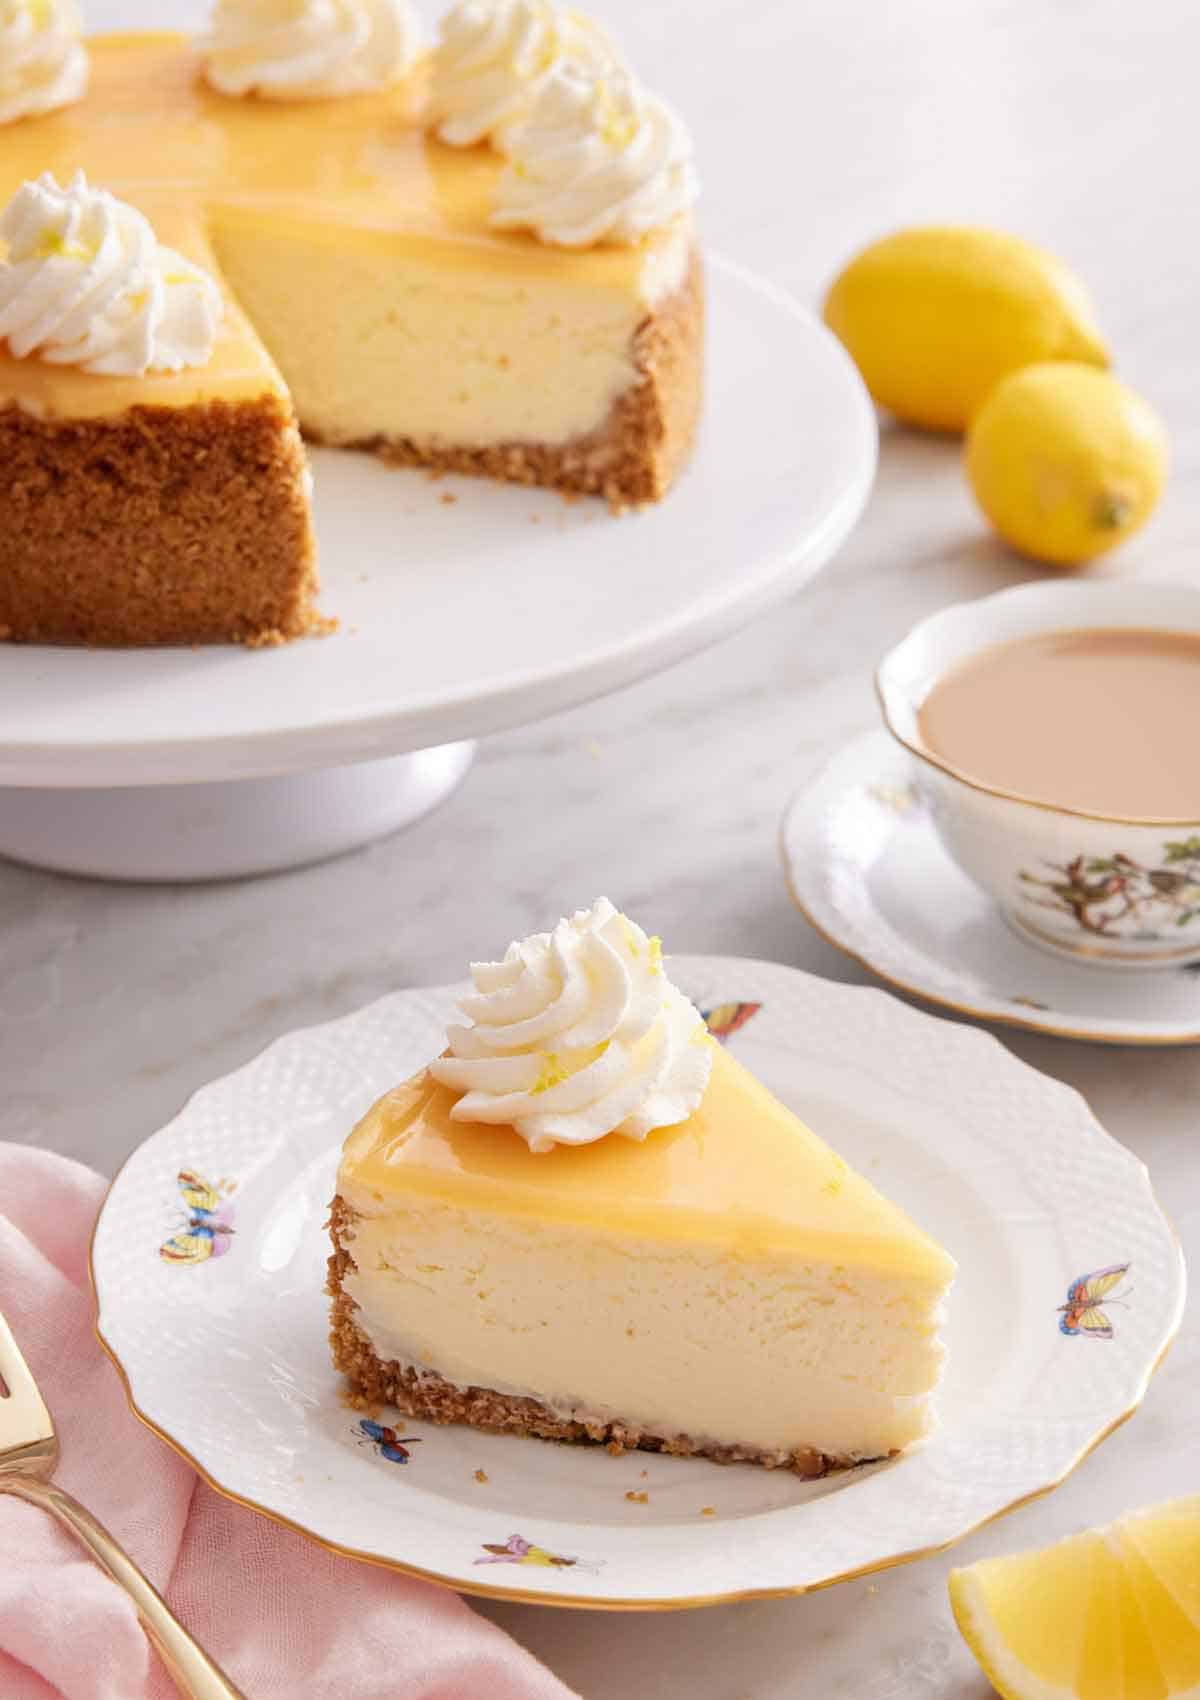 A slice of lemon cheesecake with whipped cream with a cup of coffee and the rest of the cake on a cake stand in the back.